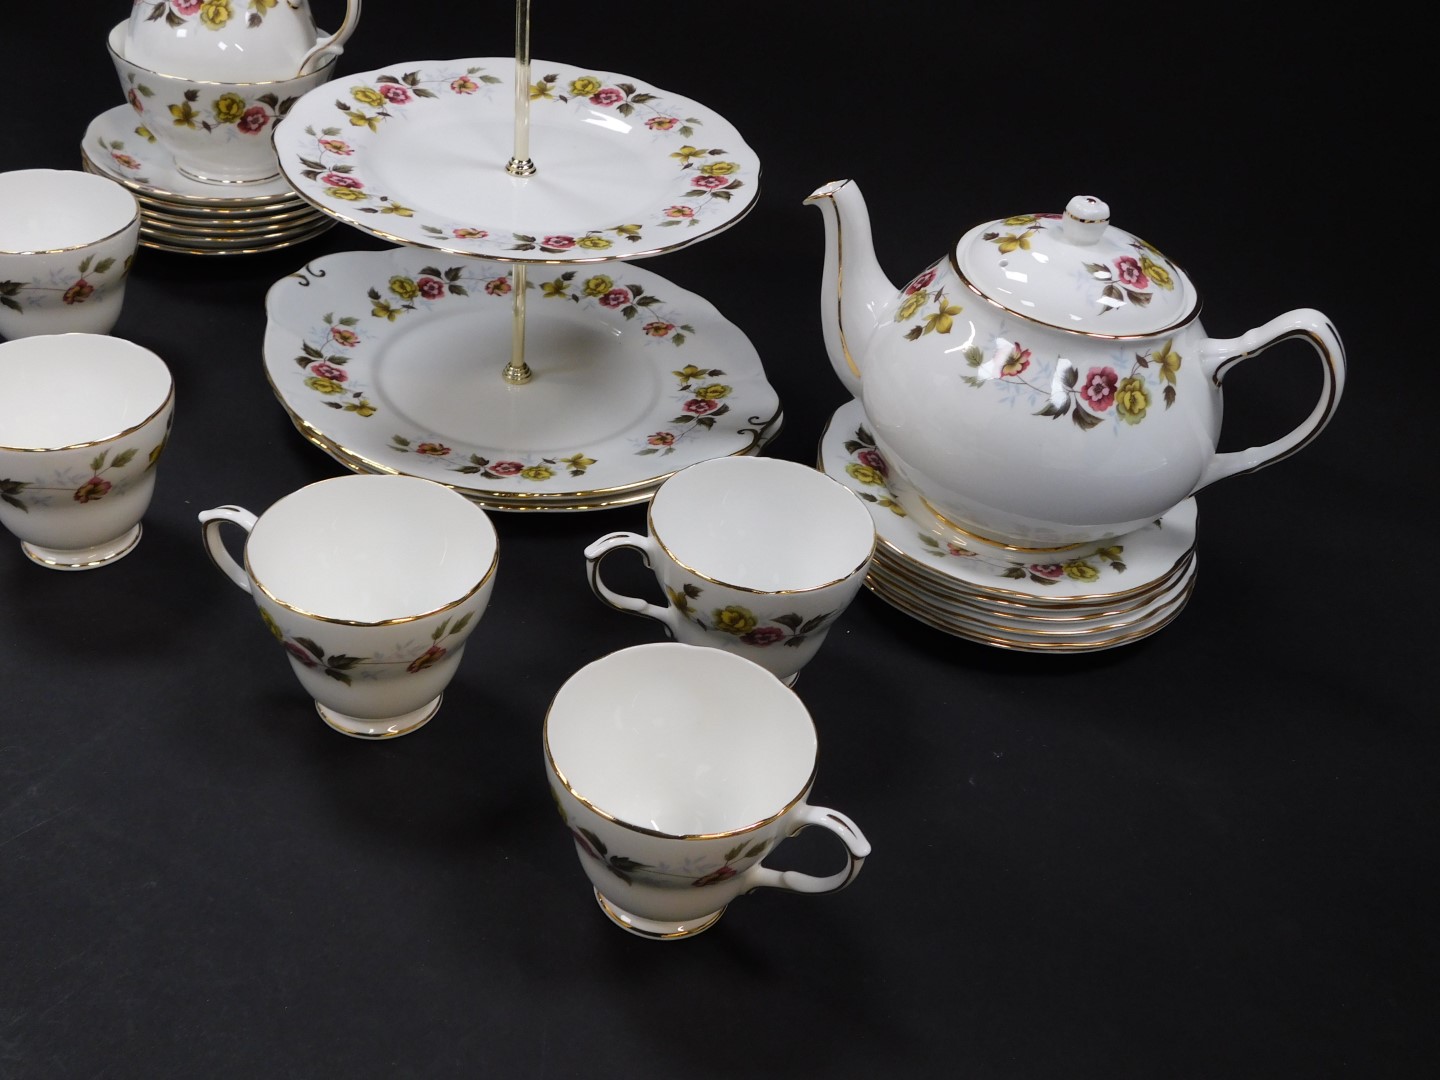 A Duchess china part tea service decorated in the Romance pattern, comprising two tier cake stand, c - Image 2 of 4